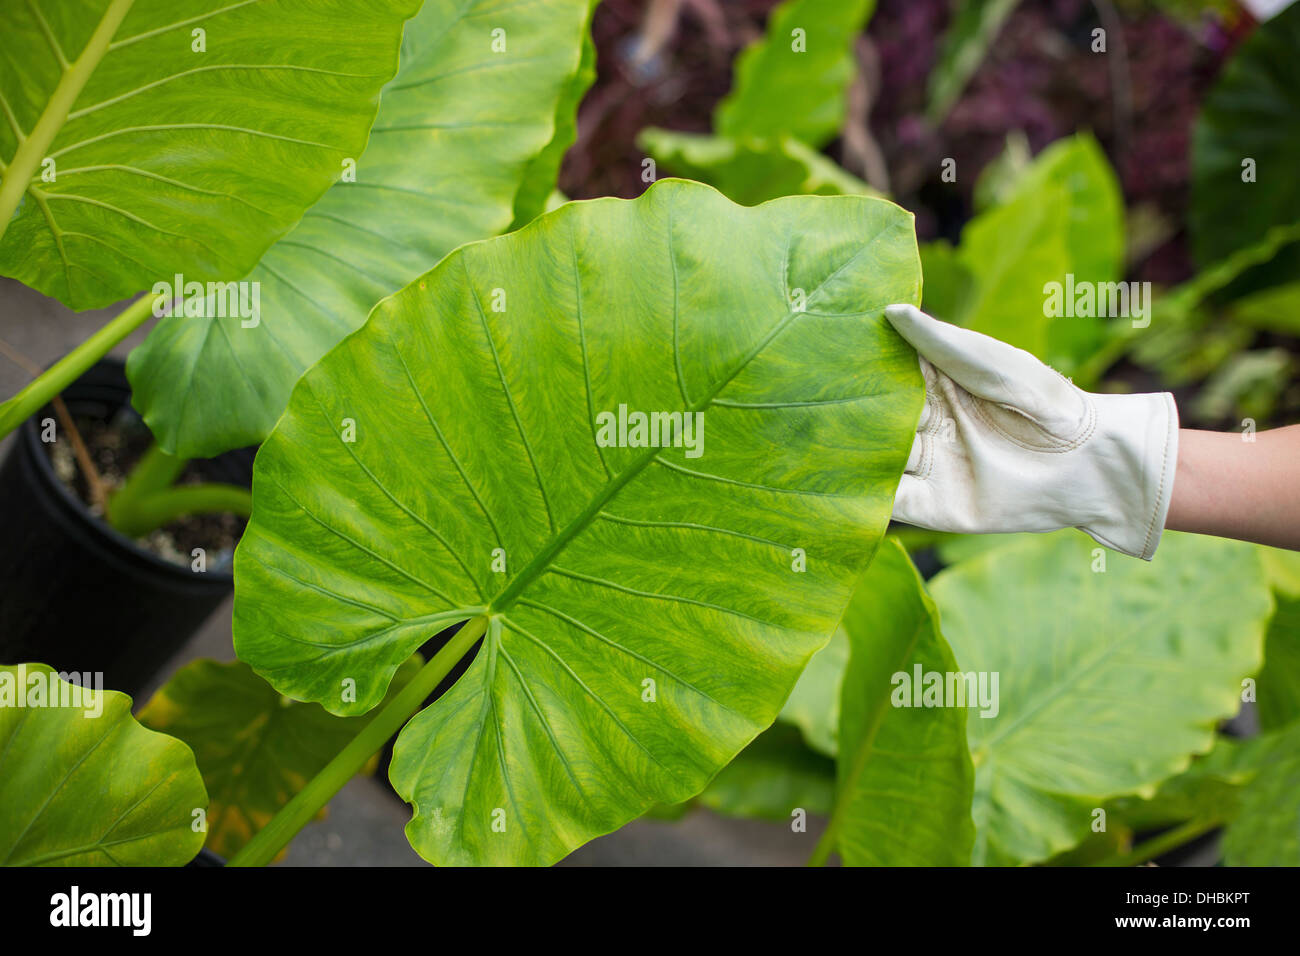 Working on an organic farm. A woman wearing gloves examining the leaves of a tropical plant. Stock Photo